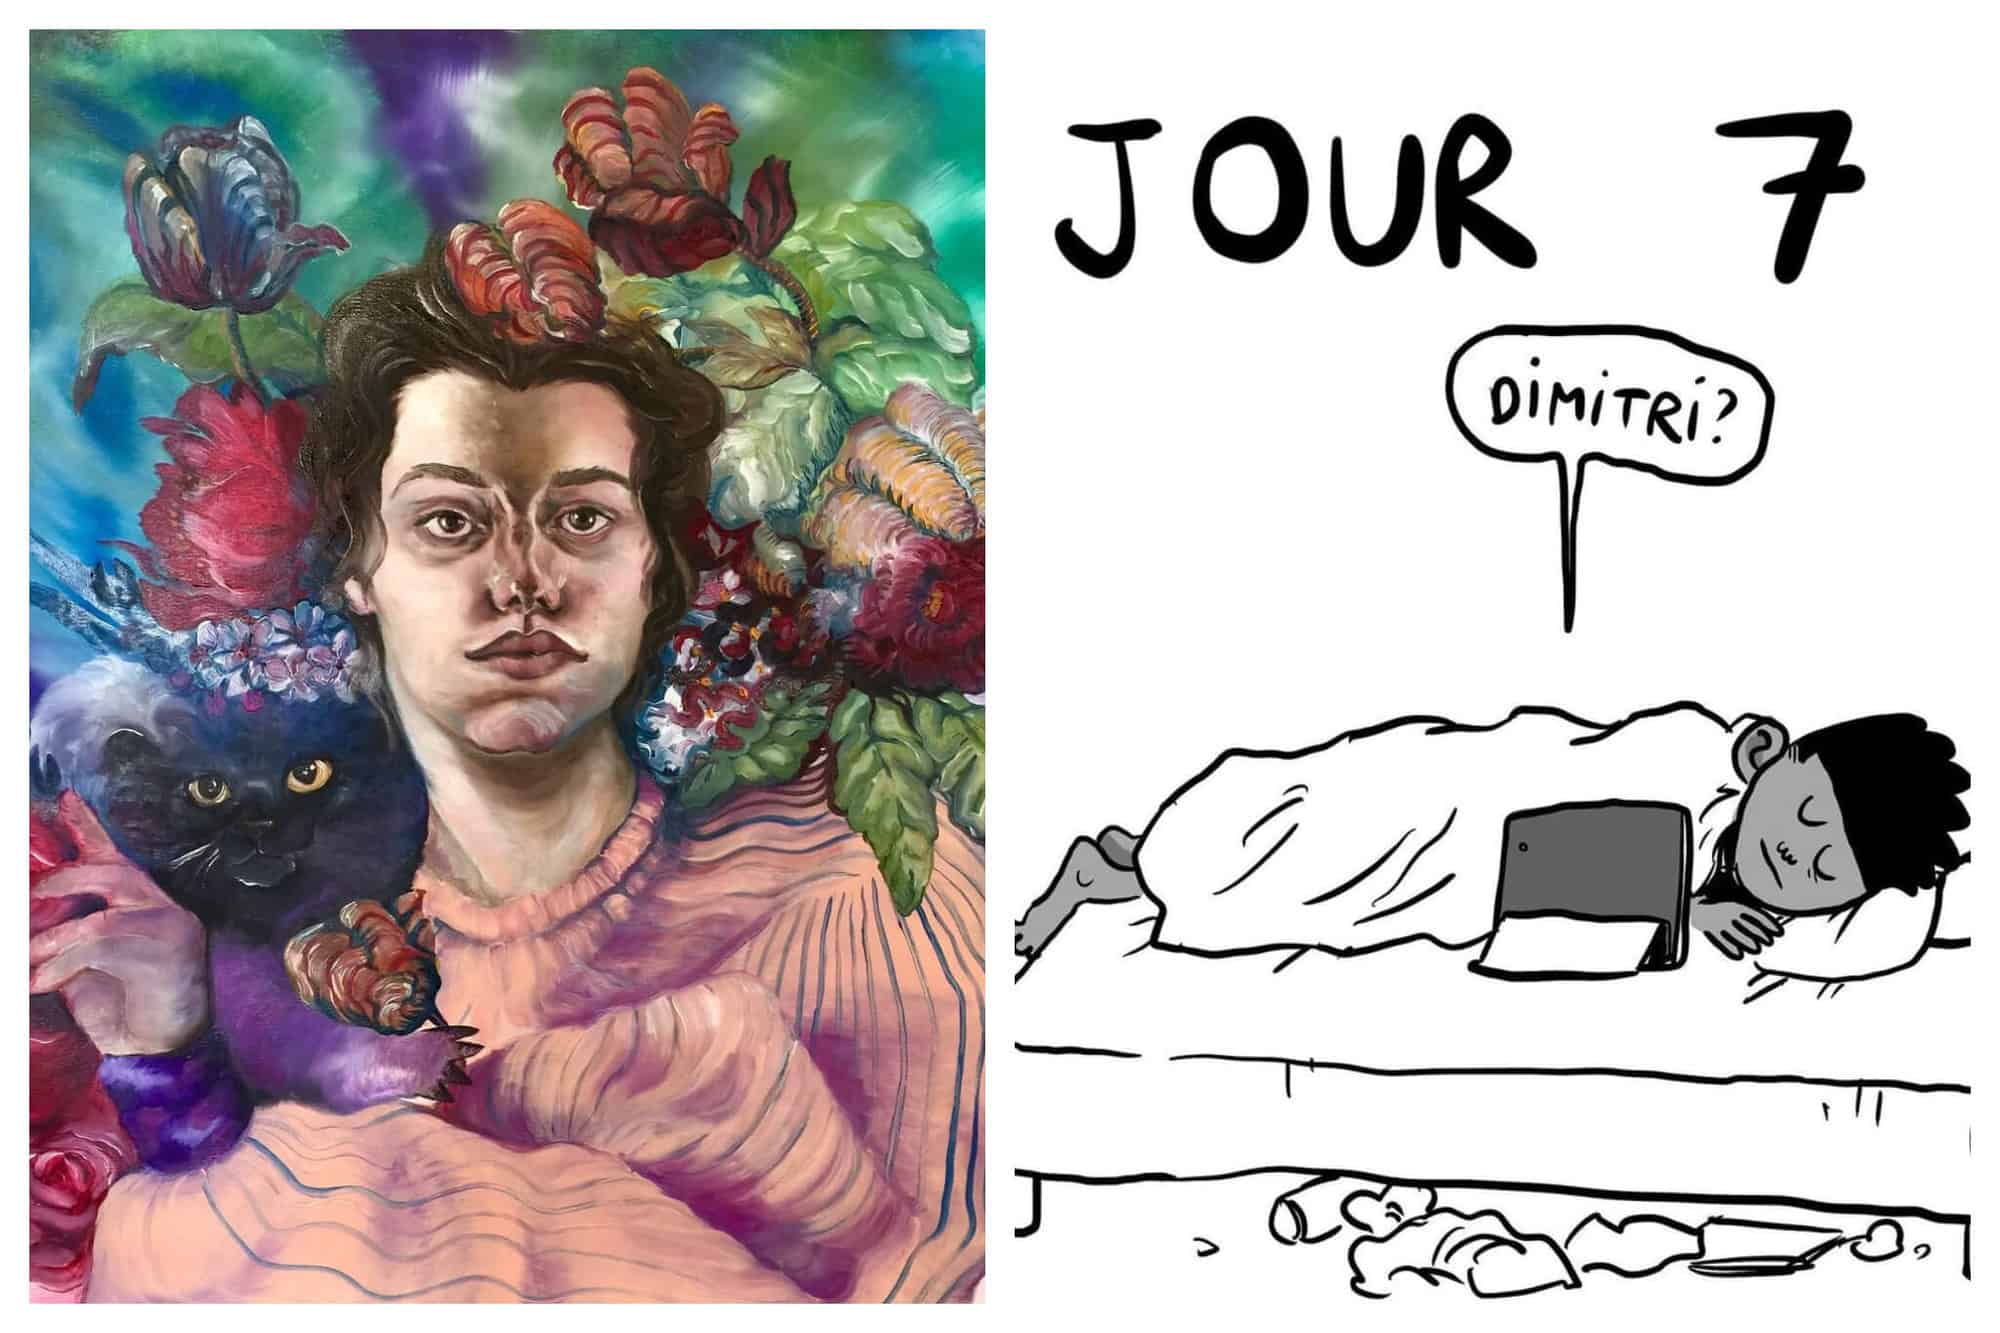 Left: A painting of a woman, her cat, and different flowers. Right: A comic drawing of a student named Dmitri who is sleeping during what appears to be an online class.